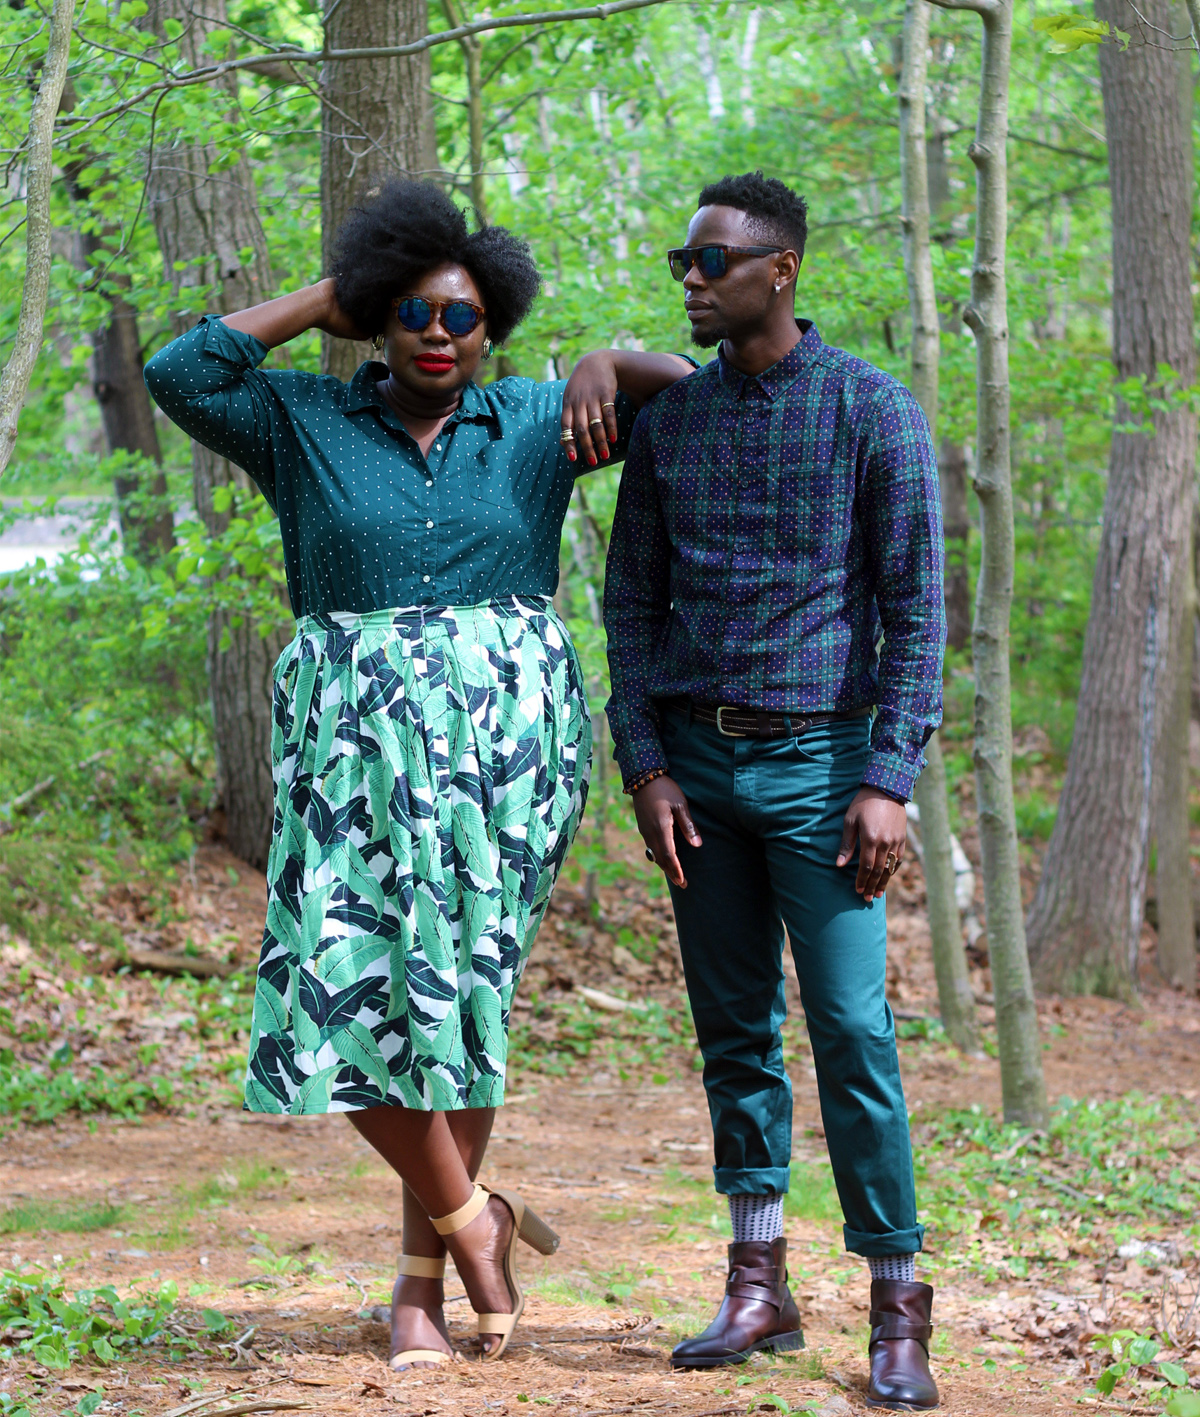 style twins his and hers style green and polka dots stylish siblings 05